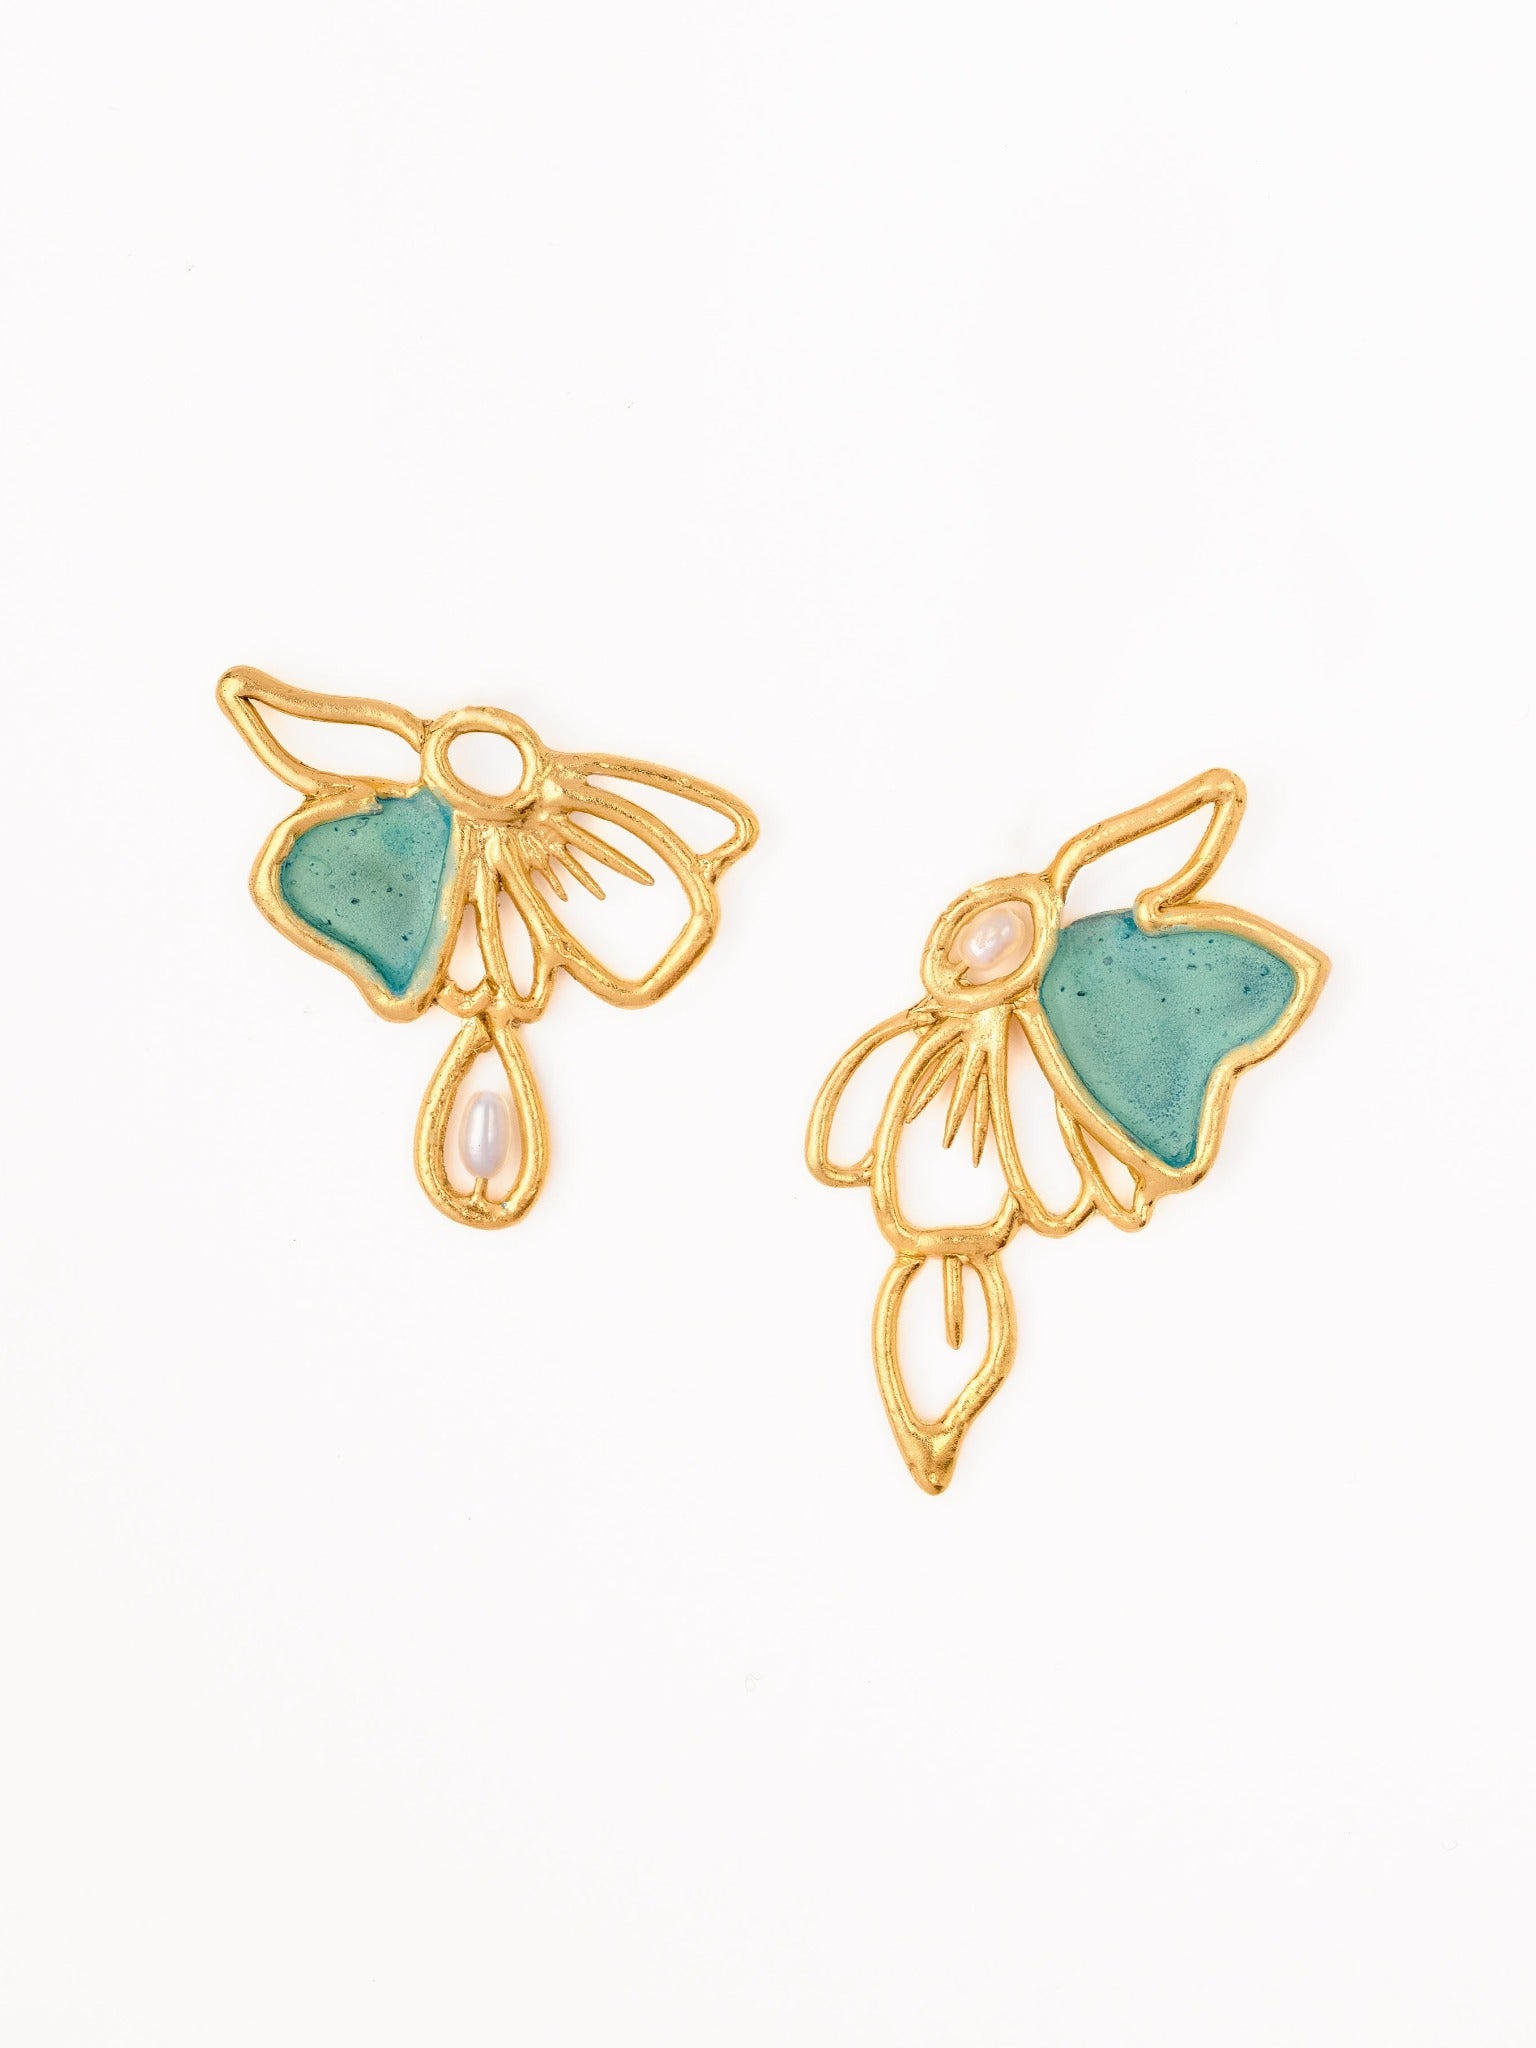 The Night Blossom Earrings in Green